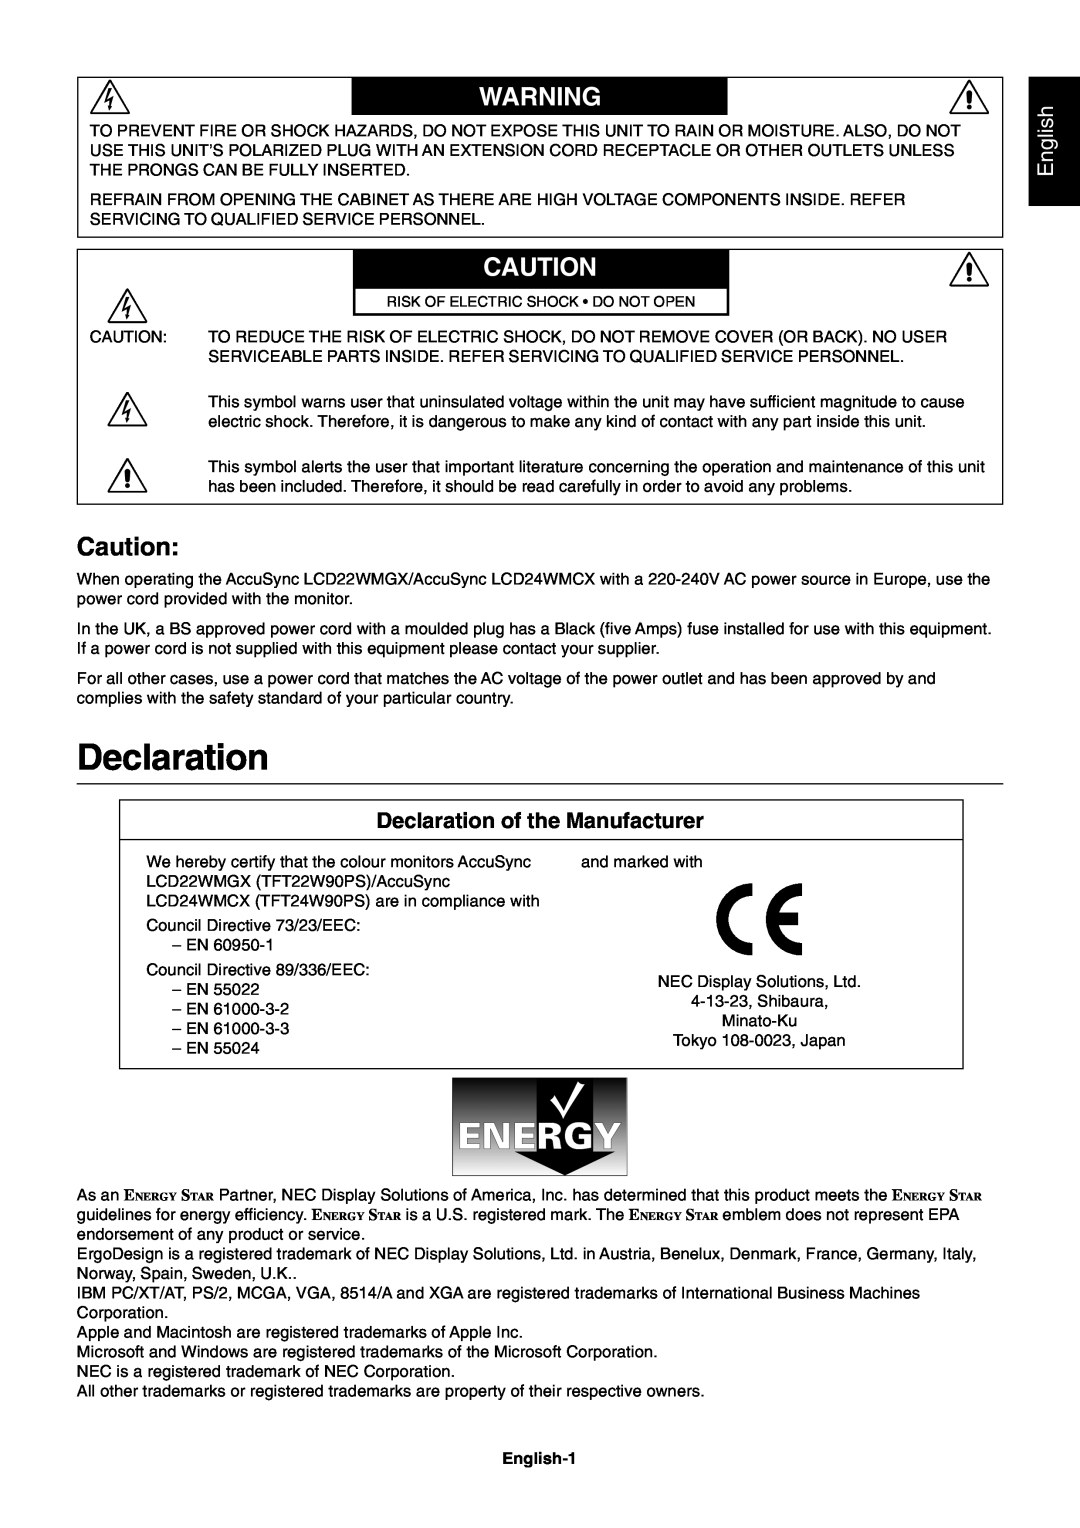 NEC LCD22WMGX user manual English, Declaration of the Manufacturer 